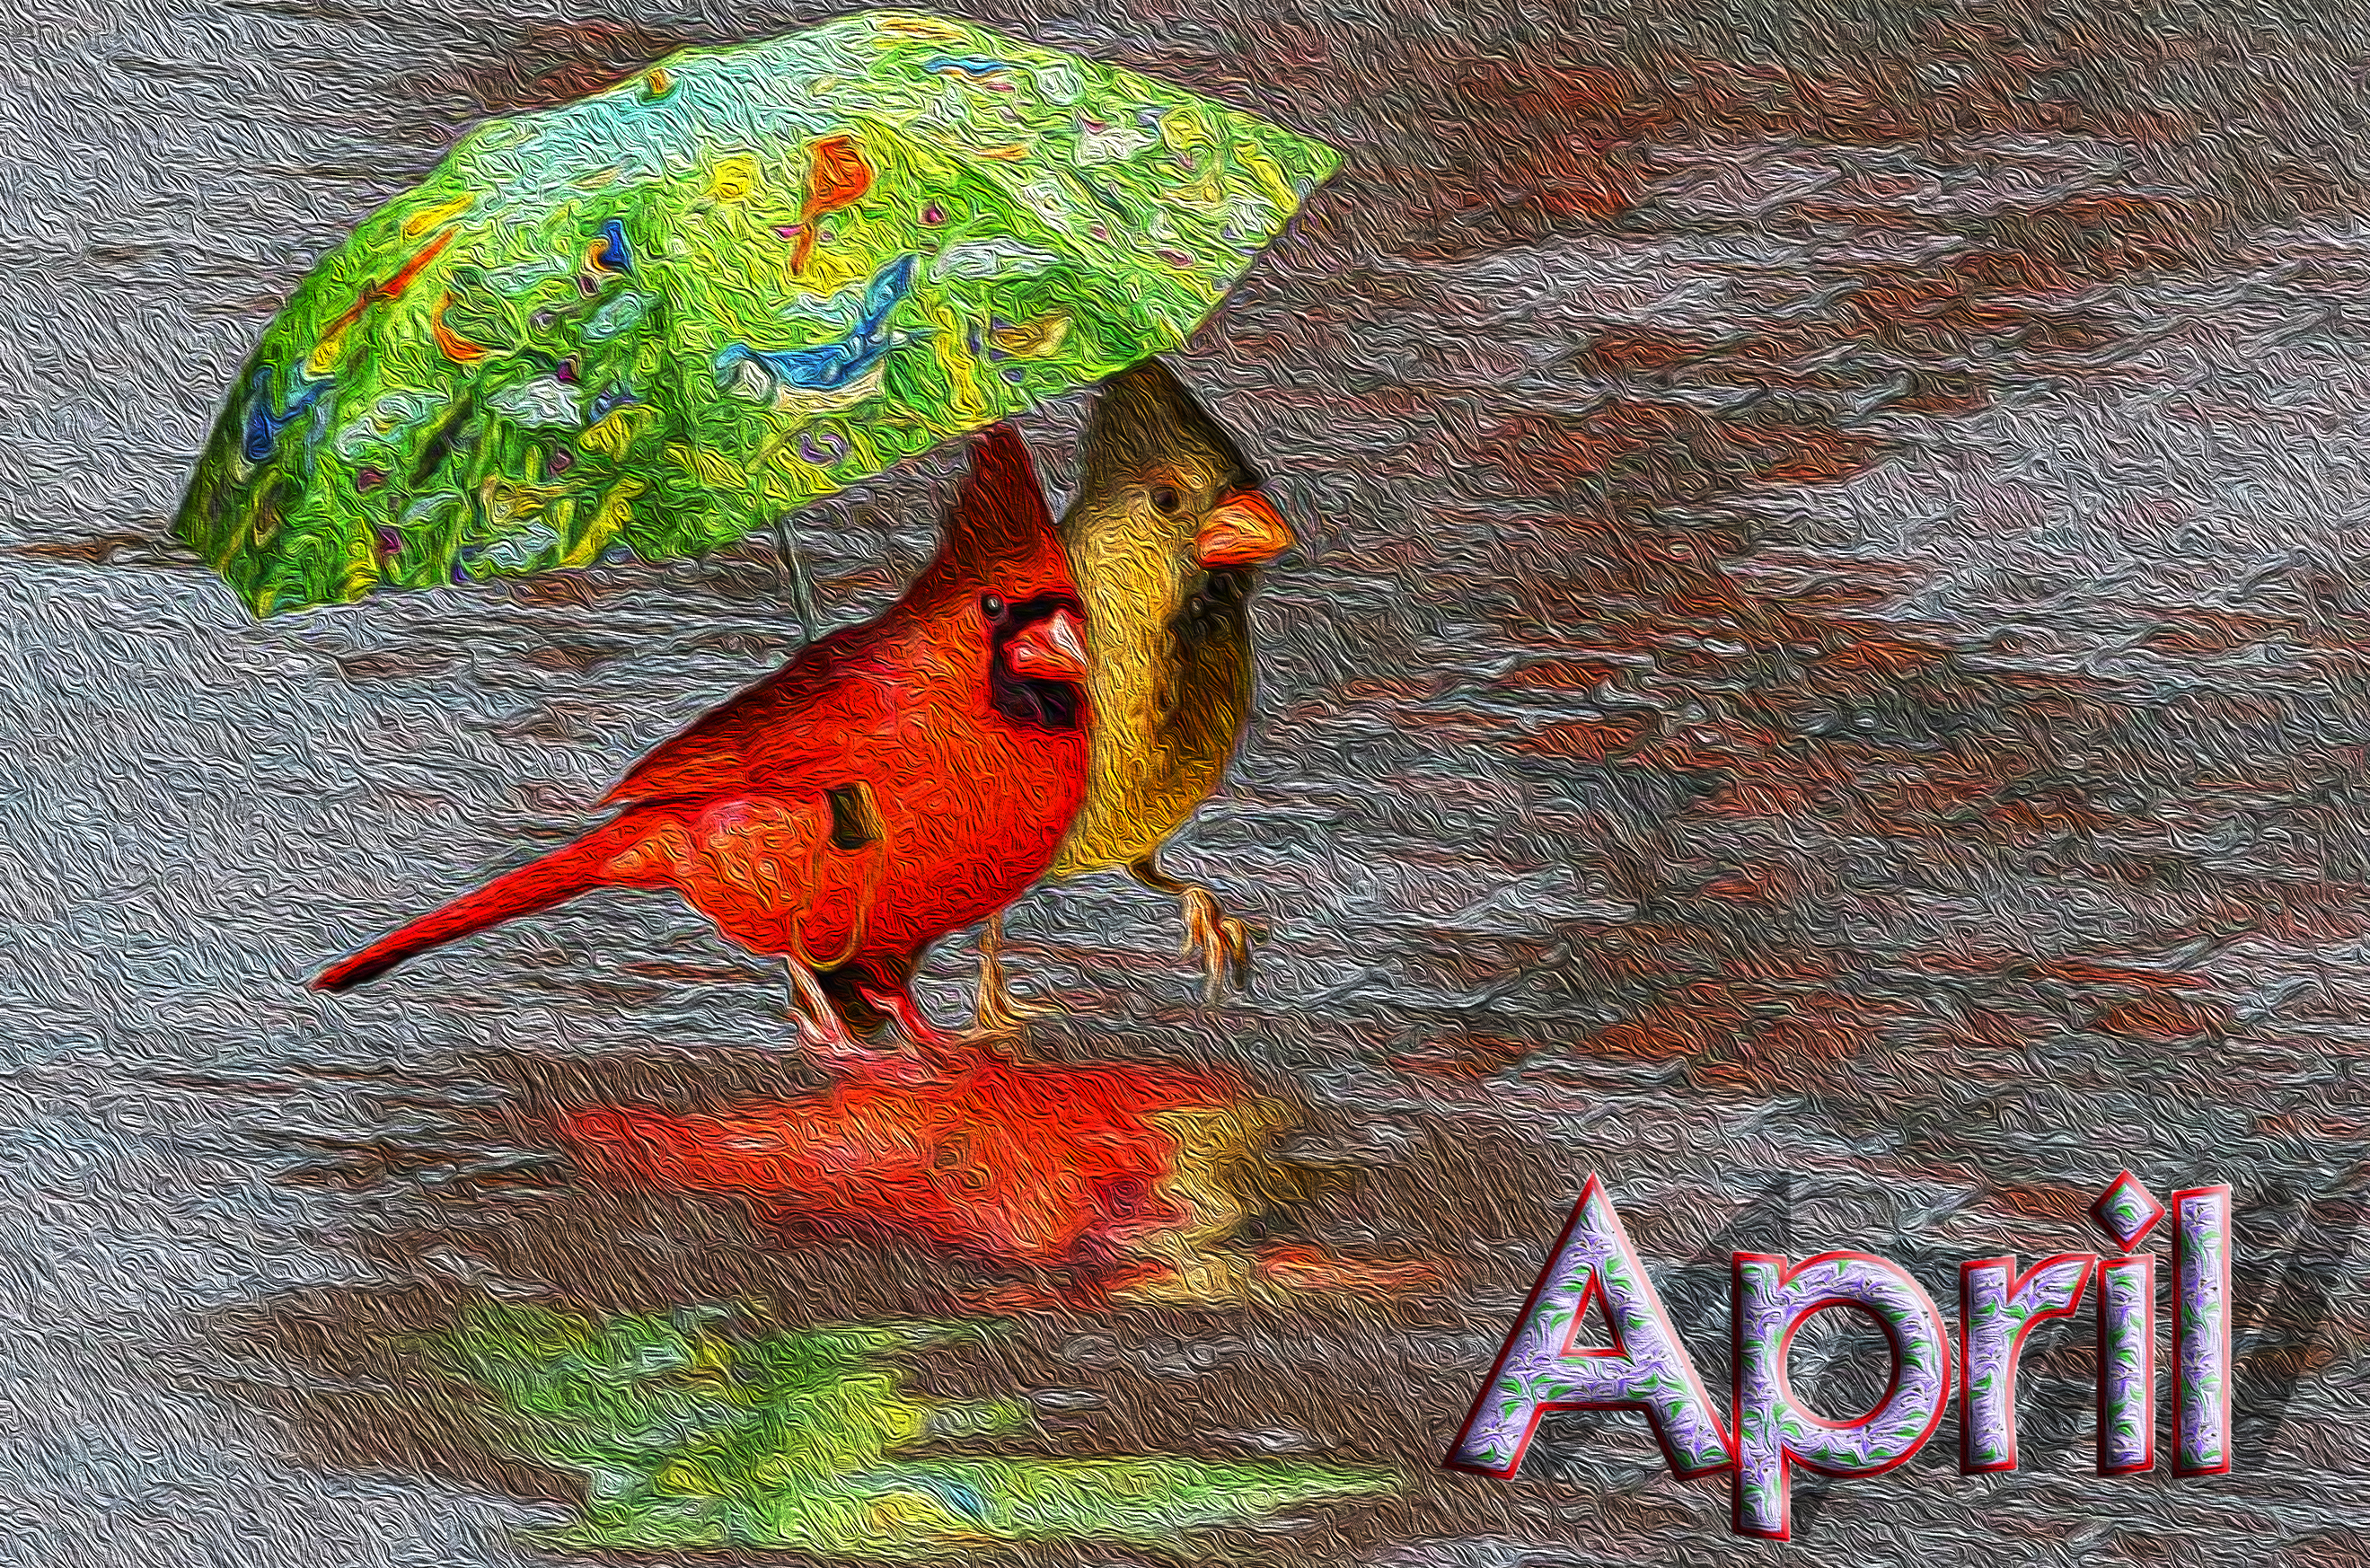 April: Latin name “Aprilis” - traditional etymology is from the verb aperire, “to open” (buds). (click to go to HISTORY INDEX)